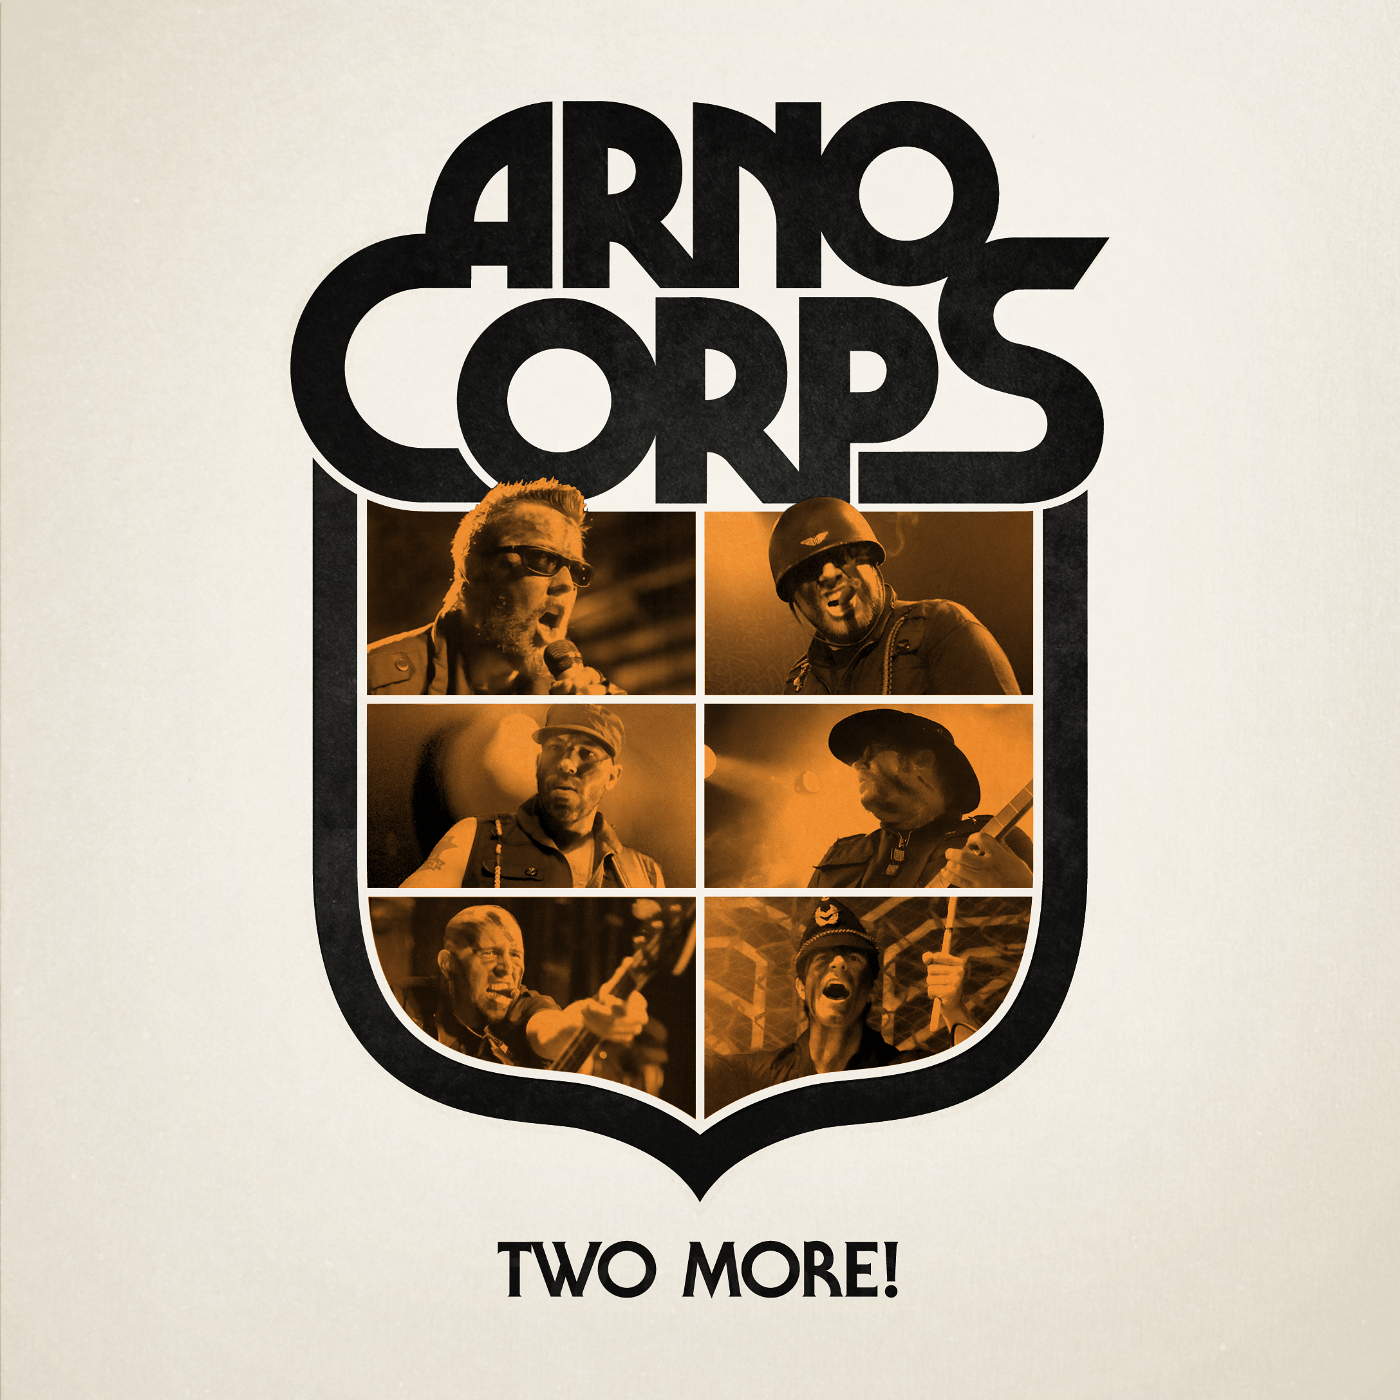 v465 - Arnocorps - "Two More!"